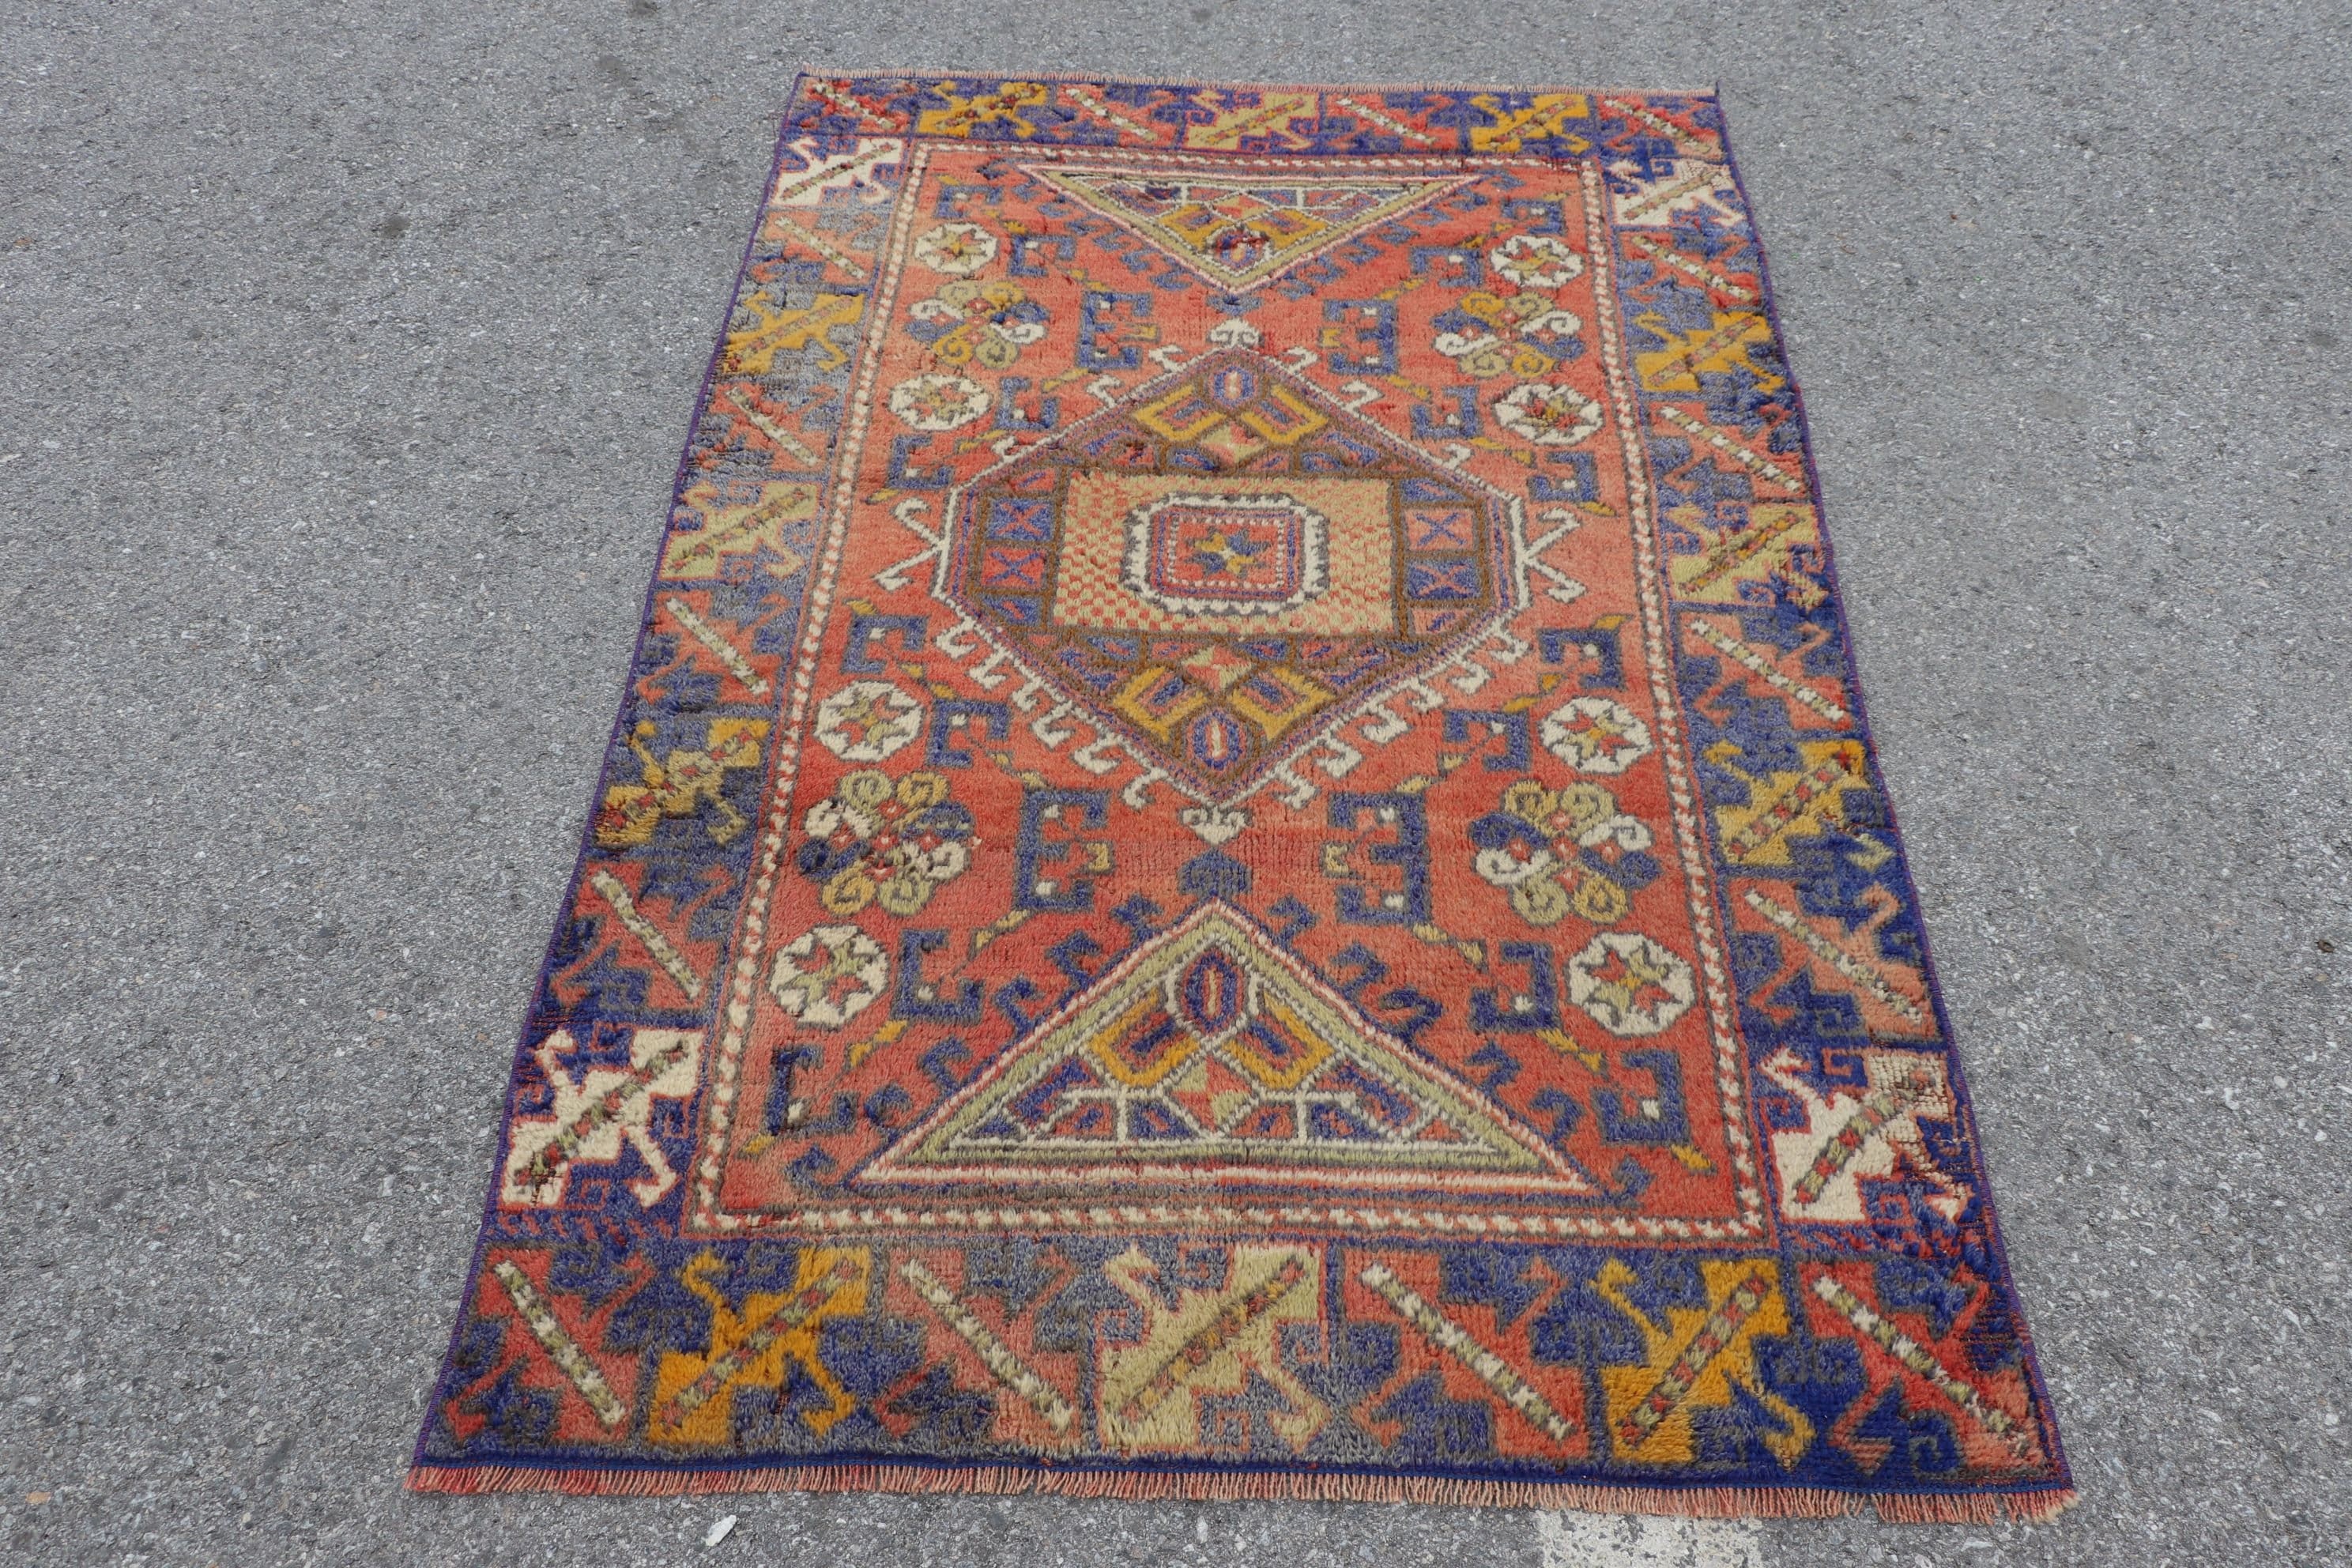 Moroccan Rug, Oriental Rug, Turkish Rugs, Vintage Rug, Entry Rugs, Outdoor Rugs, Kitchen Rugs, Orange  3.6x5.5 ft Accent Rugs